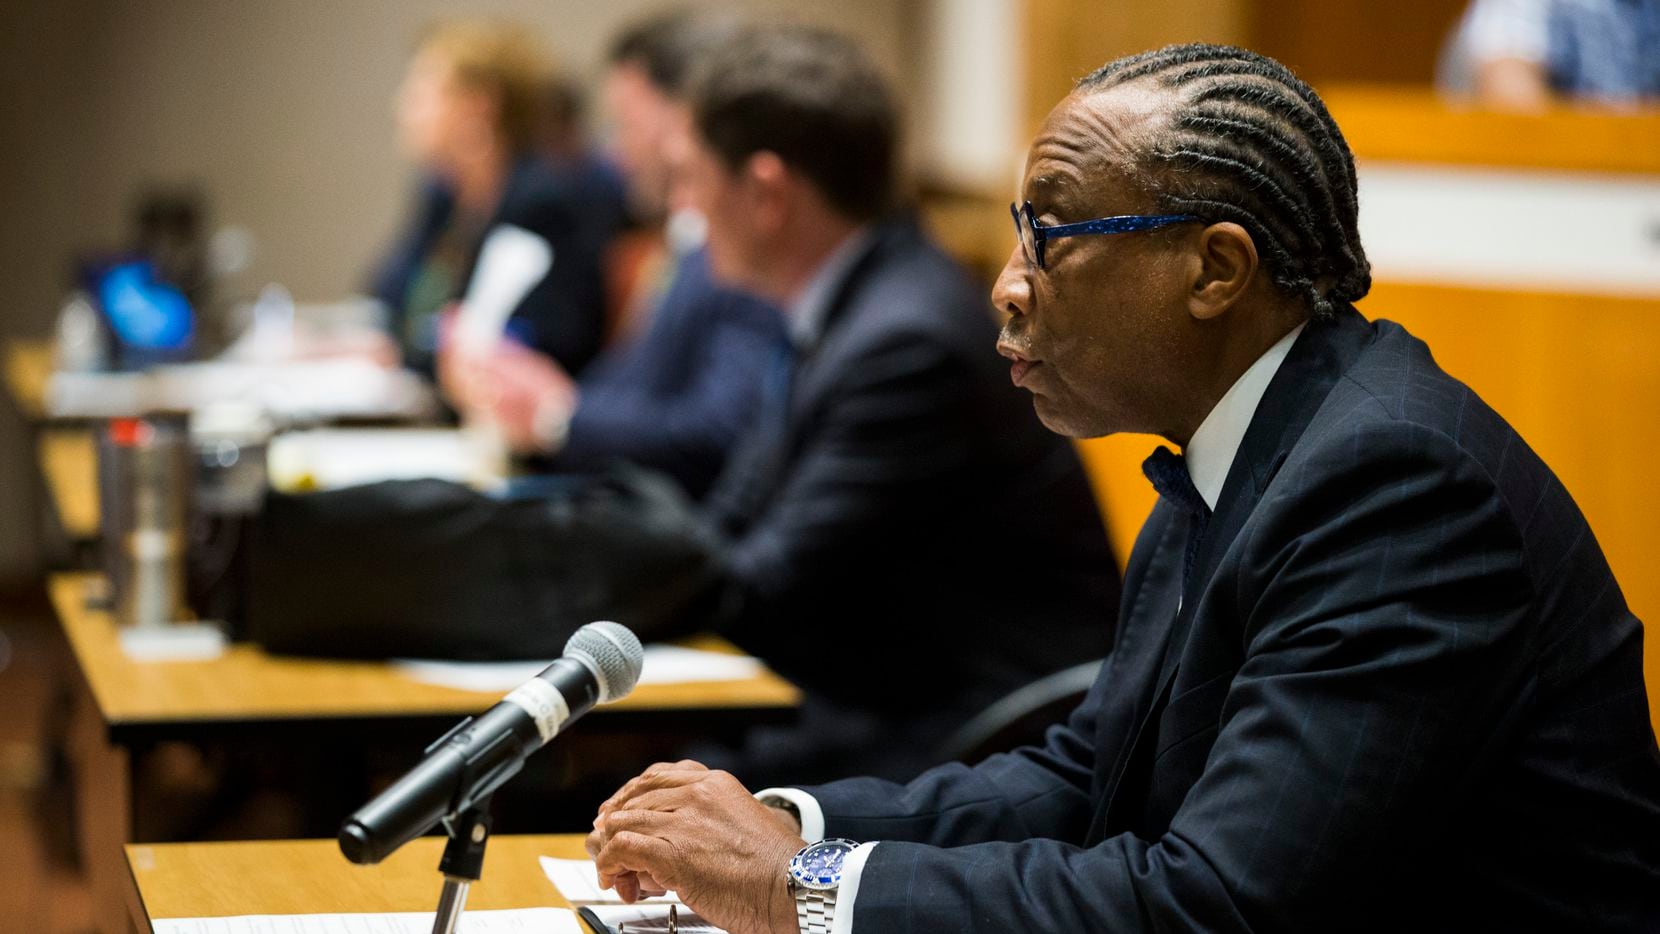 Commissioner John Wiley Price at a meeting March 19, 2020 in Dallas.